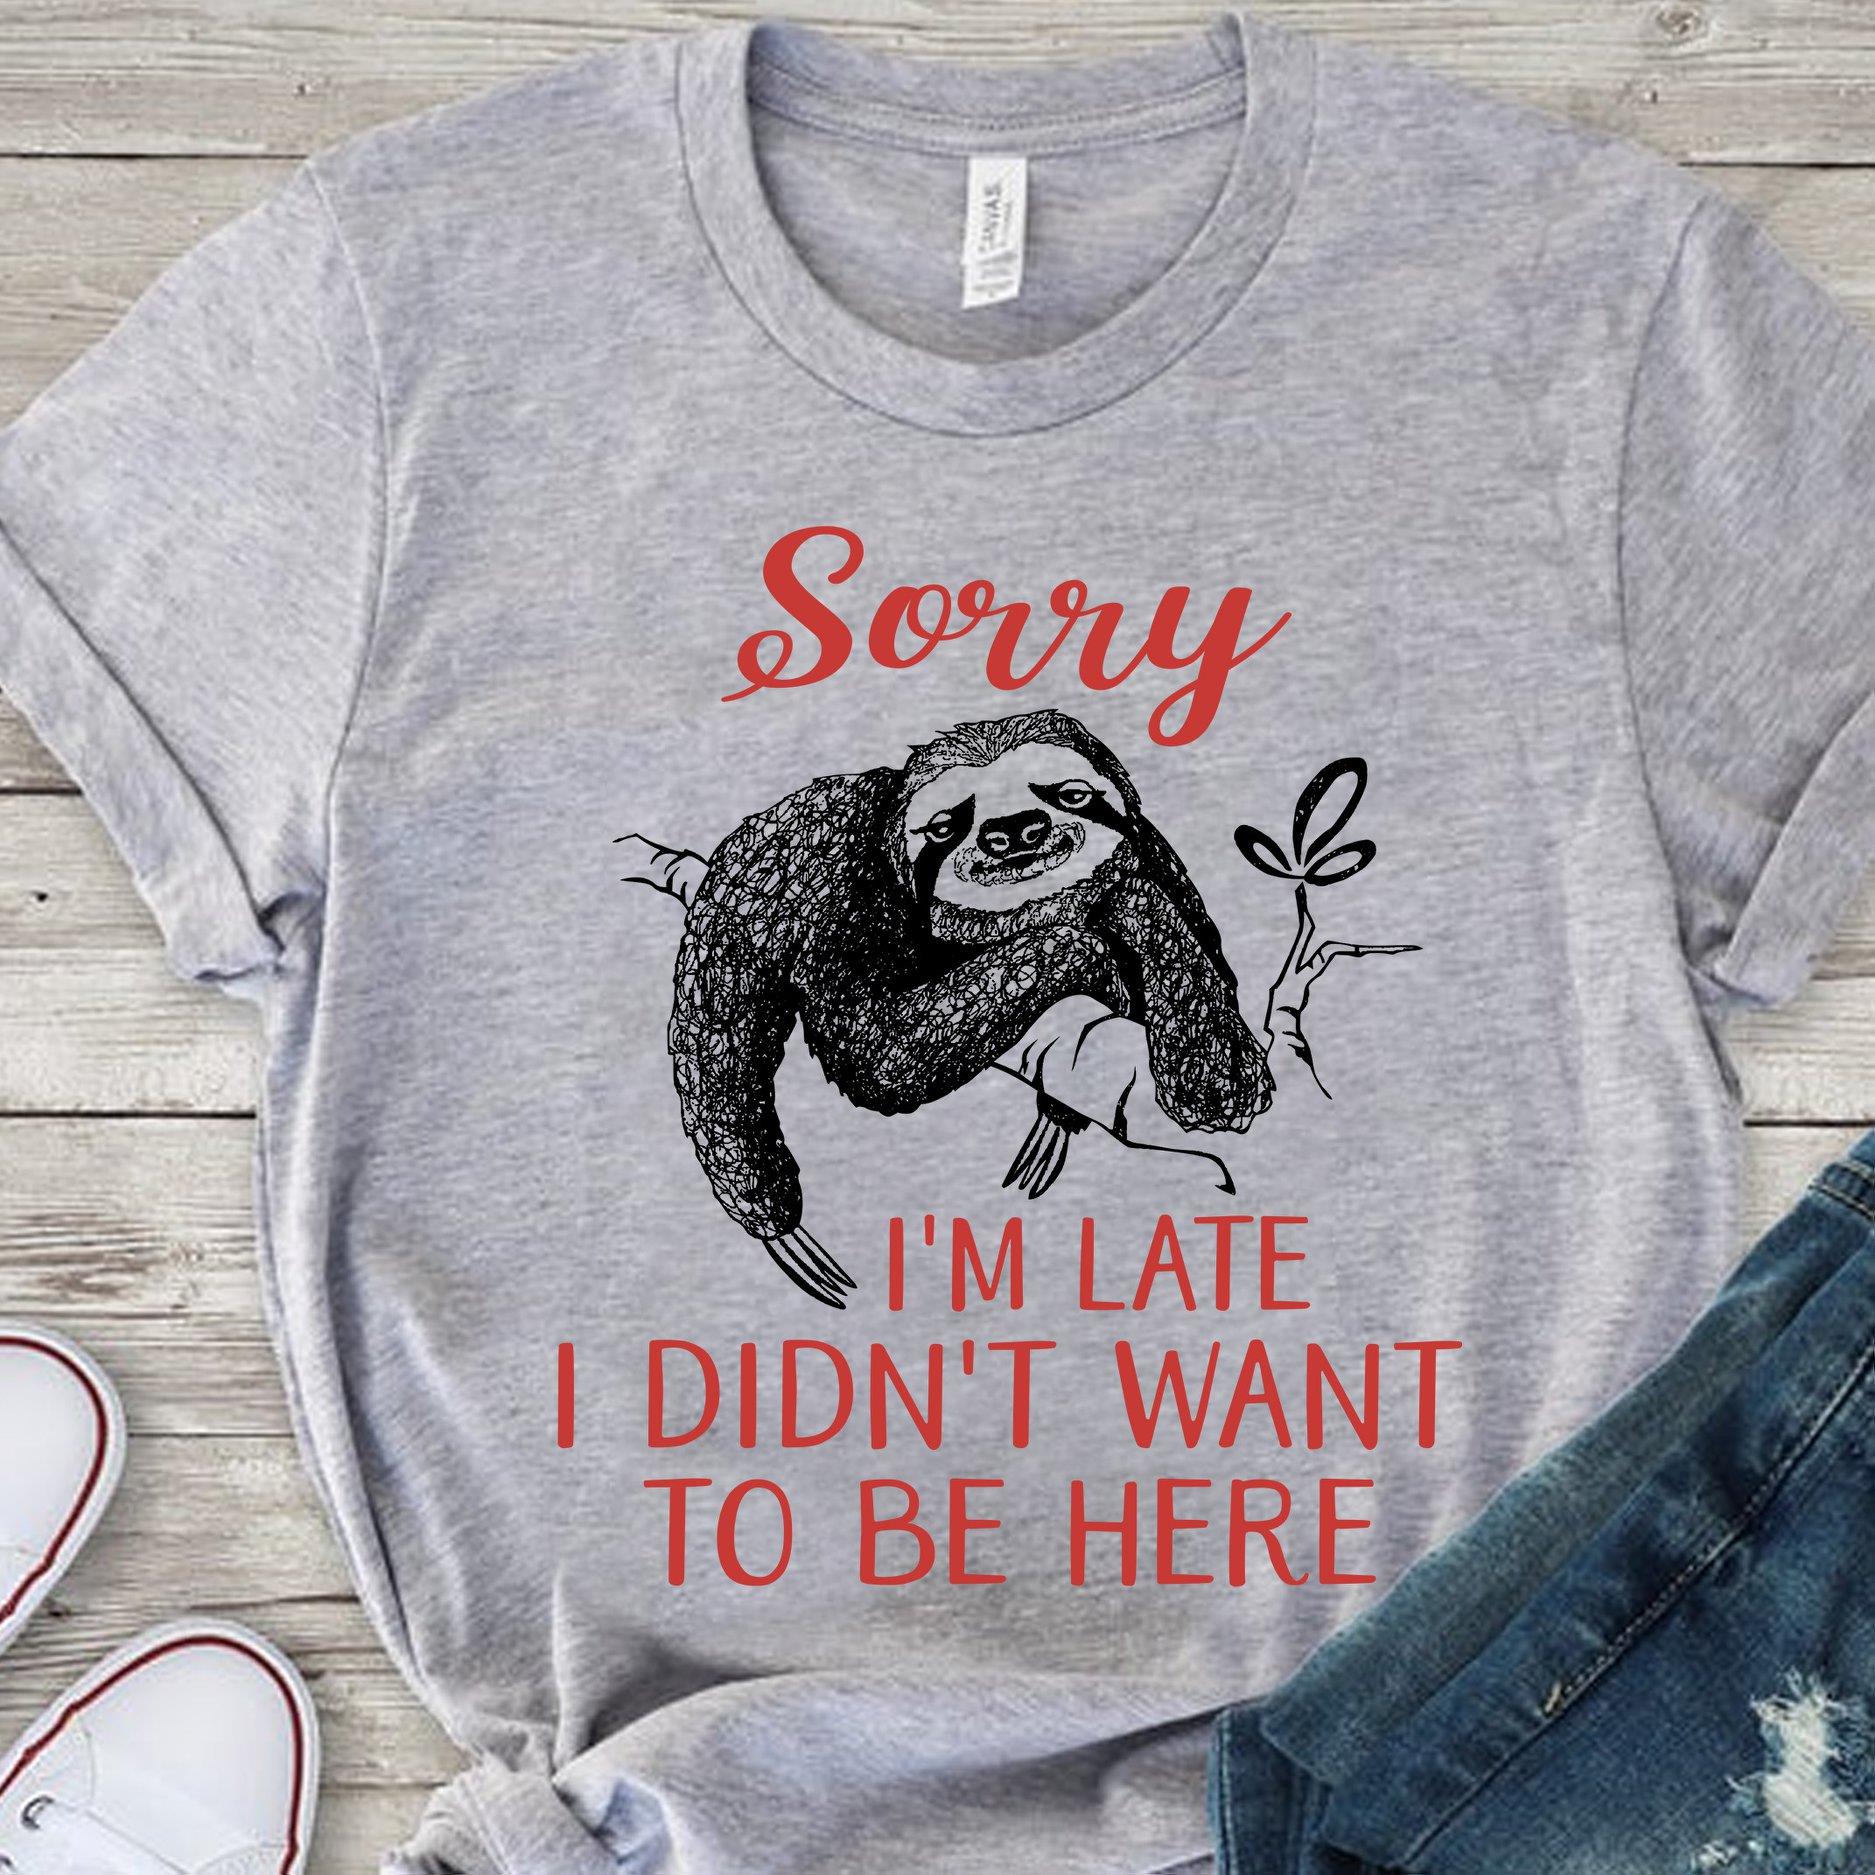 Sorry I'm late I didn't want to be here - lazy sloth